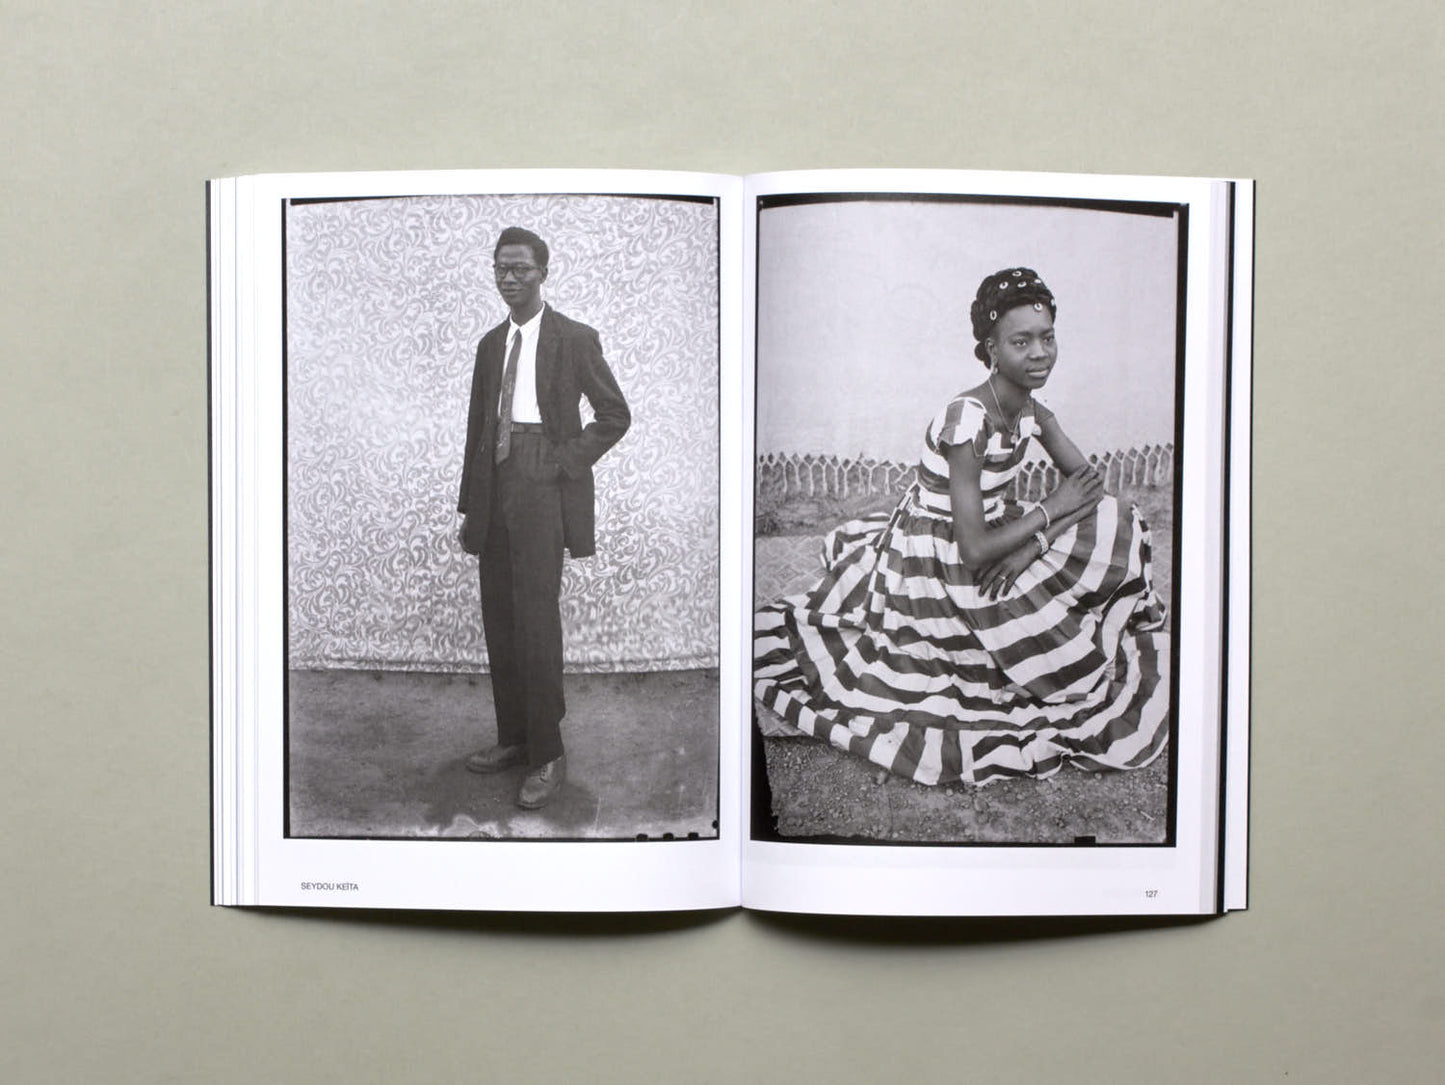 Hotshoe, Issue 207: A West African Portrait